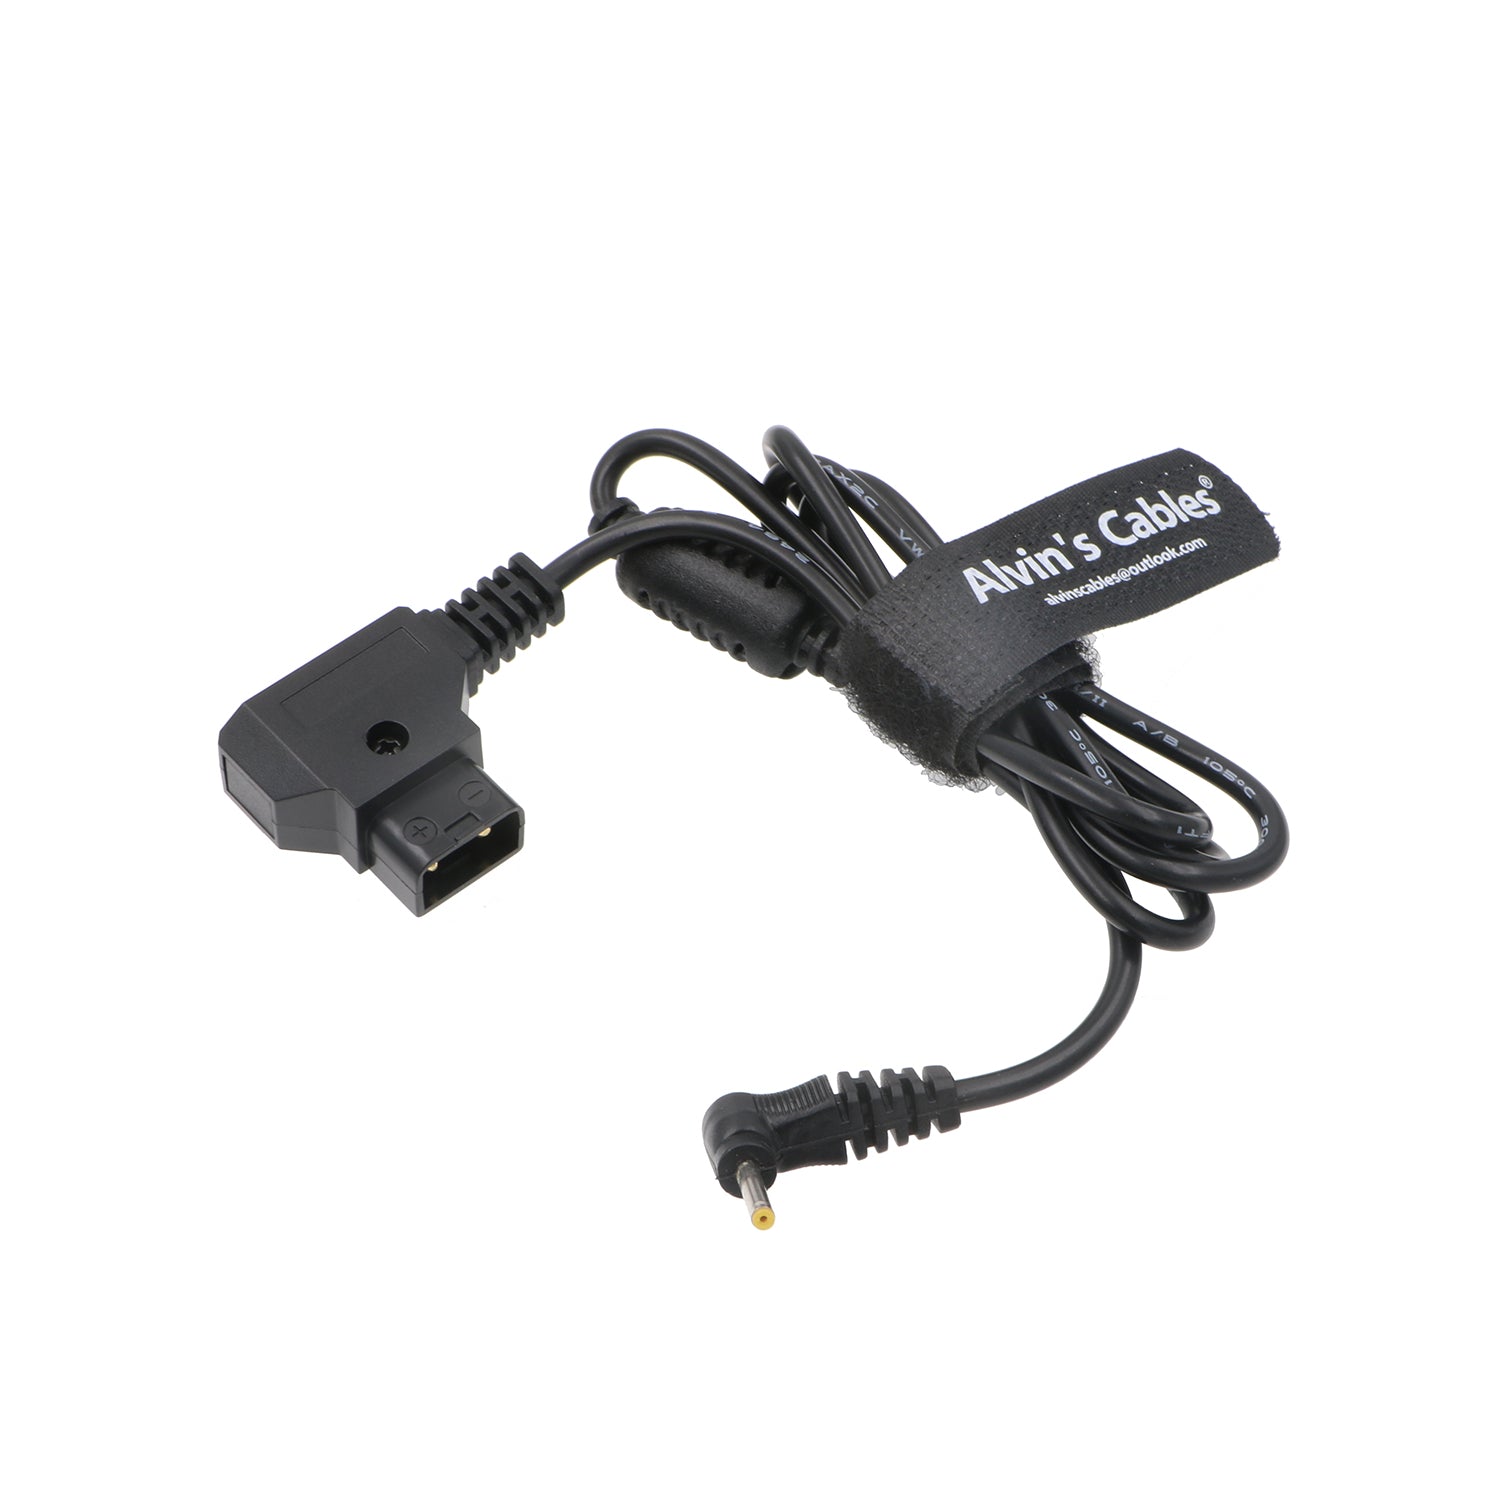 BMPCC DC Power-Cable for Blackmagic Design Pocket Cinema Camera DC 12V 2.5 0.7mm to D-tap 23.6inches| 60cm Alvin’s Cables